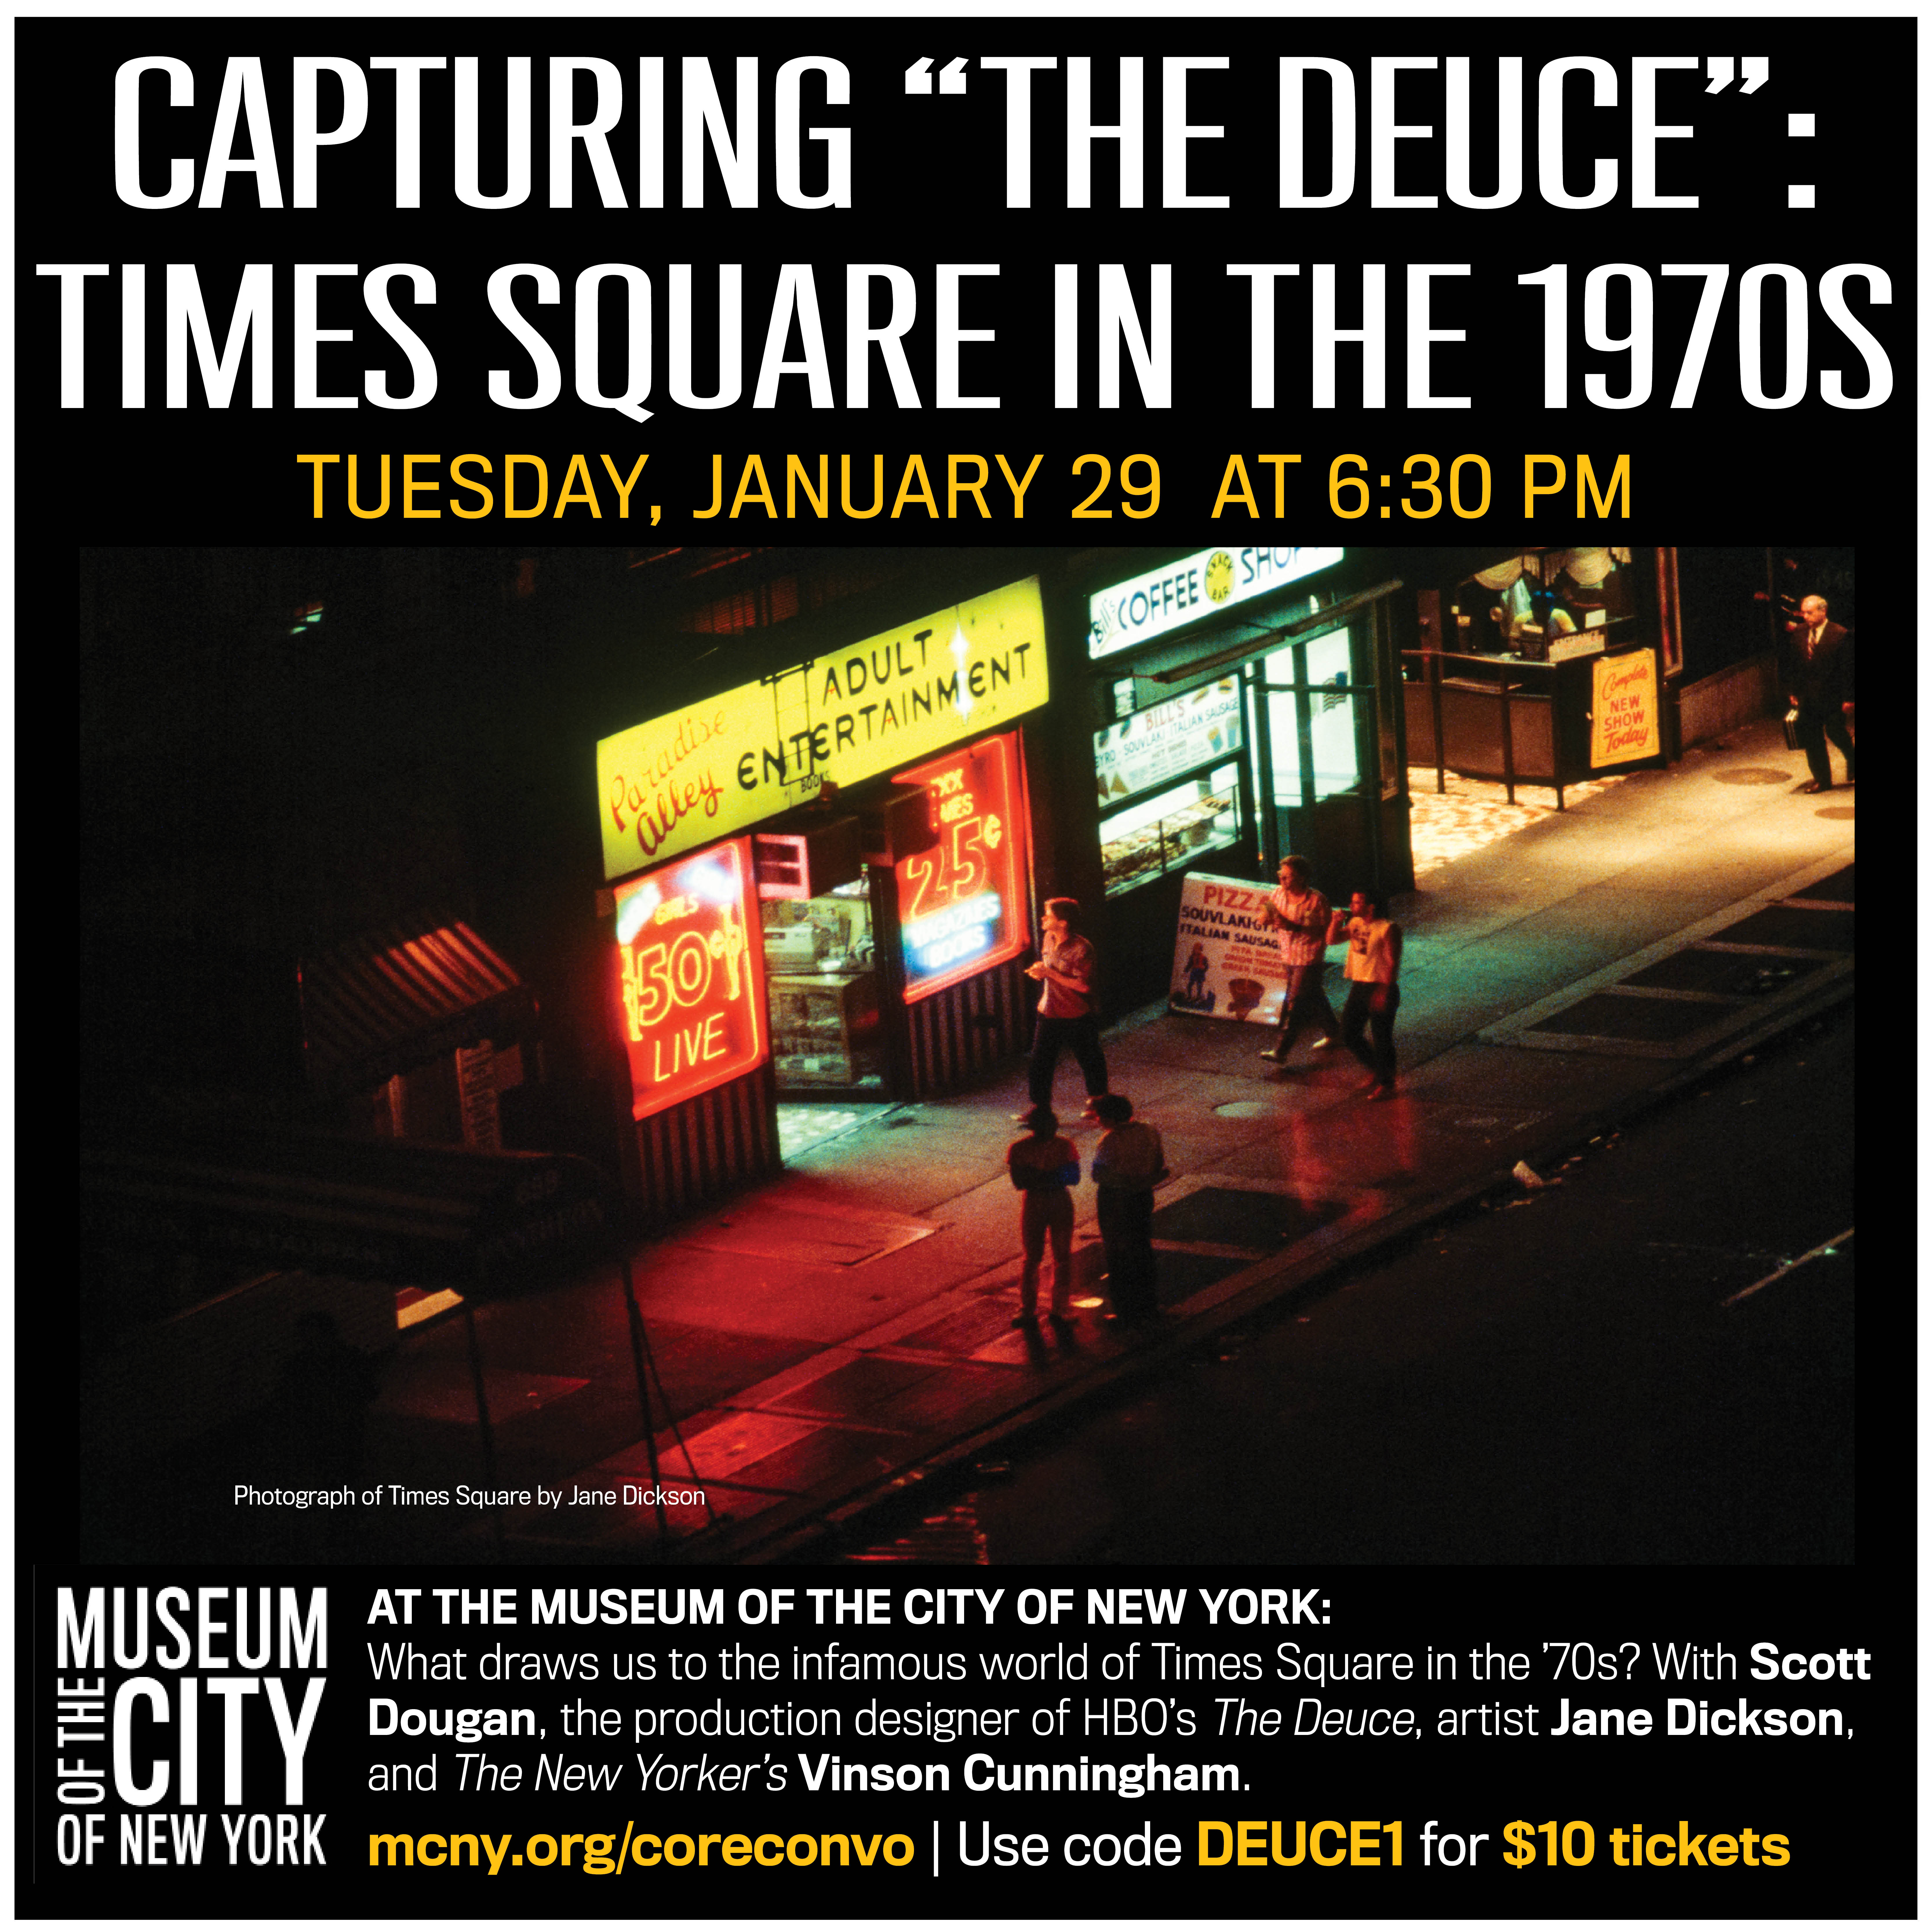 Jane Dickson in Times Square - Museum of the City of New York Event Image 